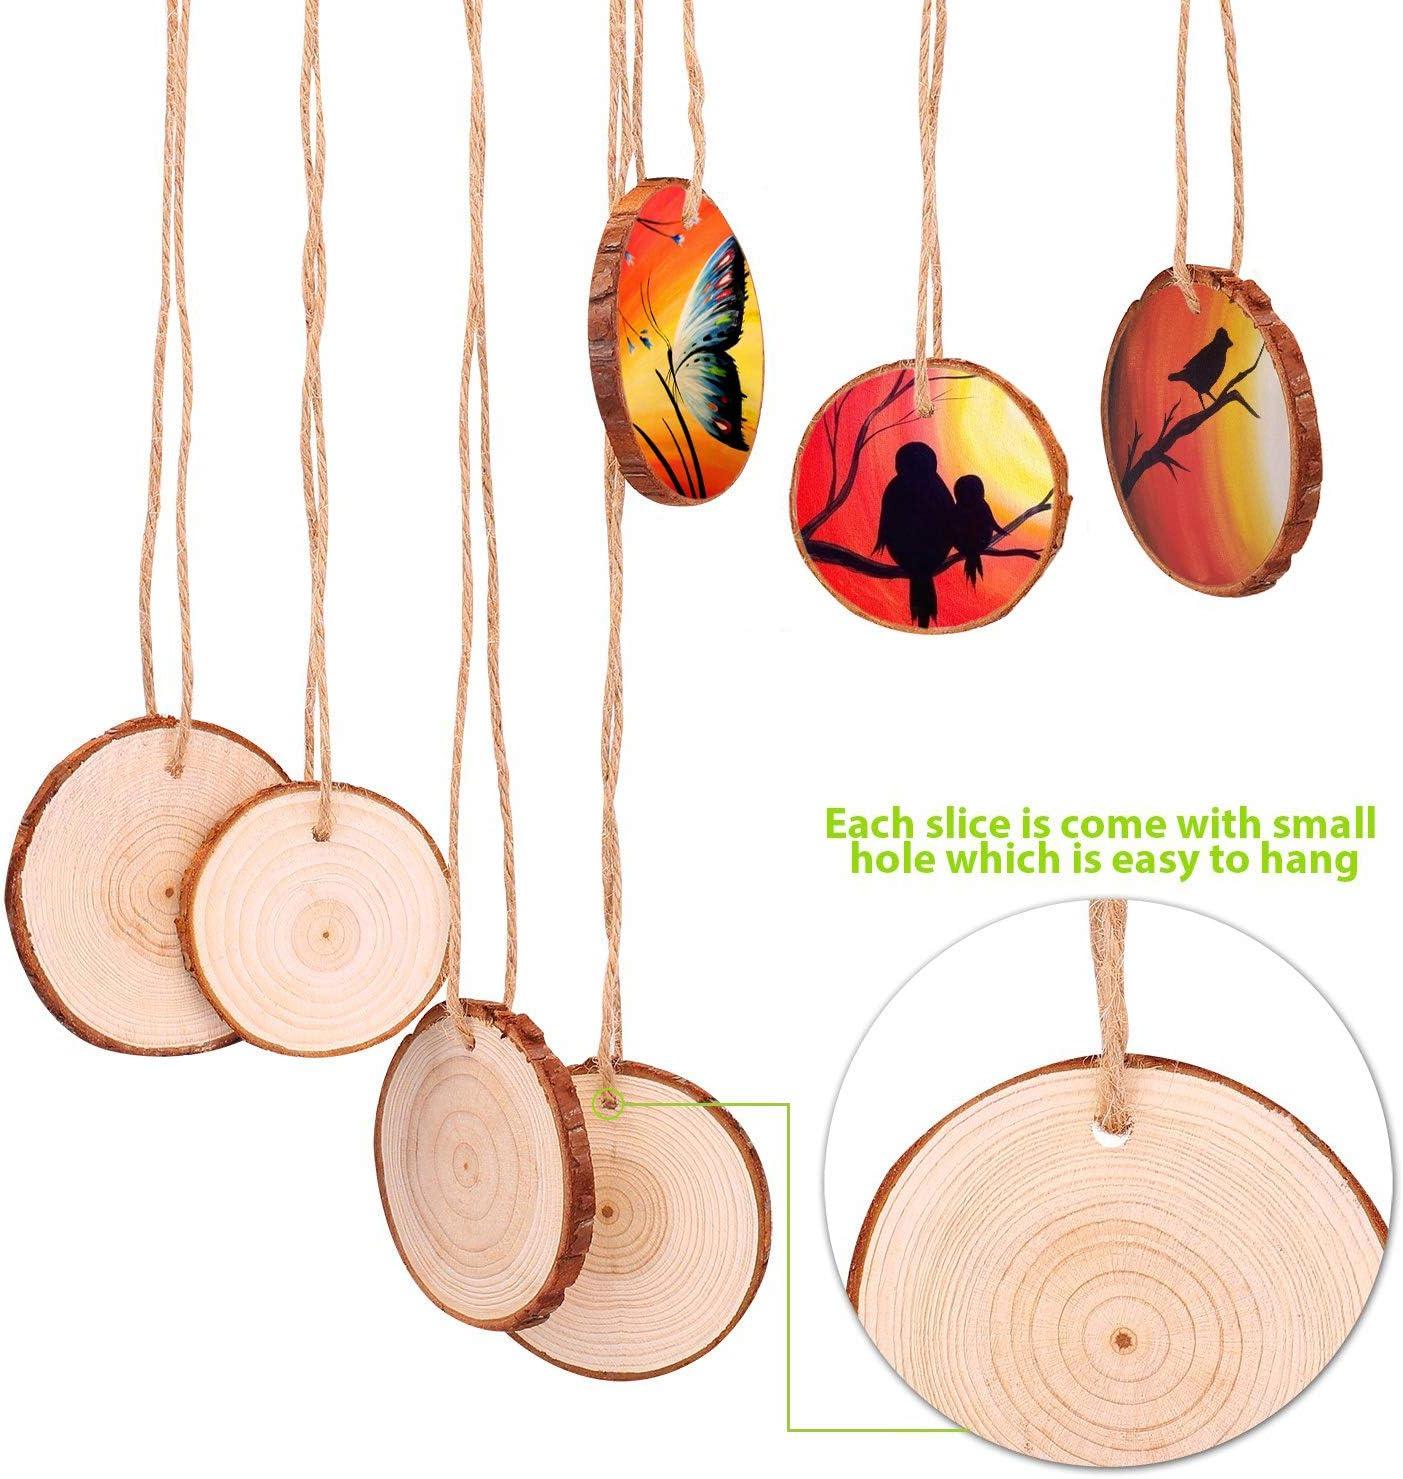 Fuyit Natural Wood Slices 30 Pcs 2.4-2.8 Inches Craft Wood Kit